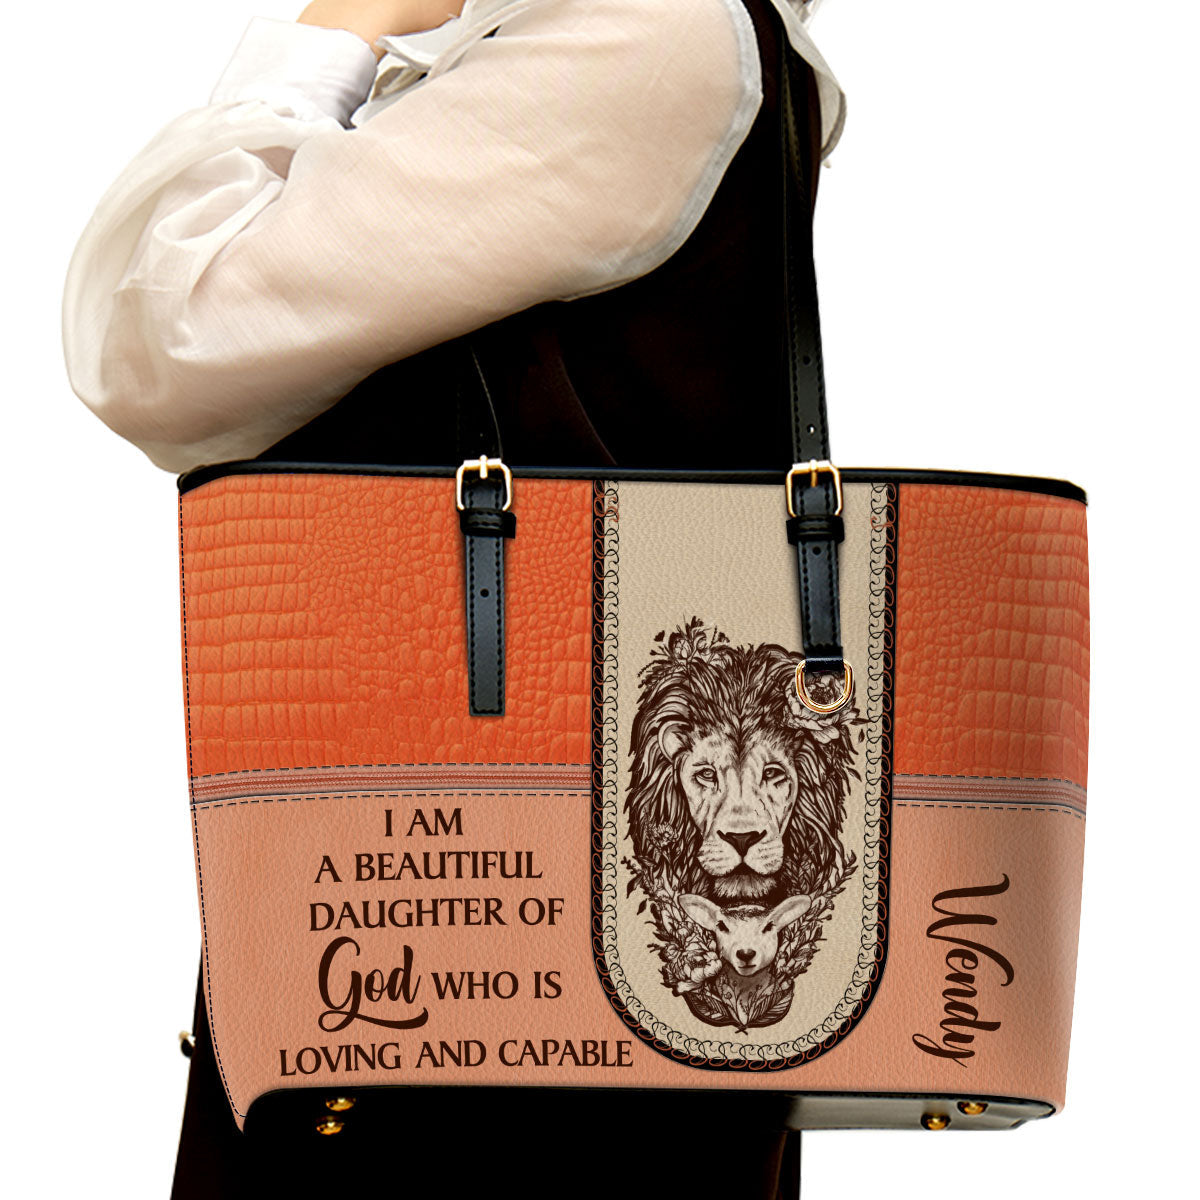 I Am A Daughter Of God Personalized Large Leather Tote Bag - Christian Inspirational Gifts For Women